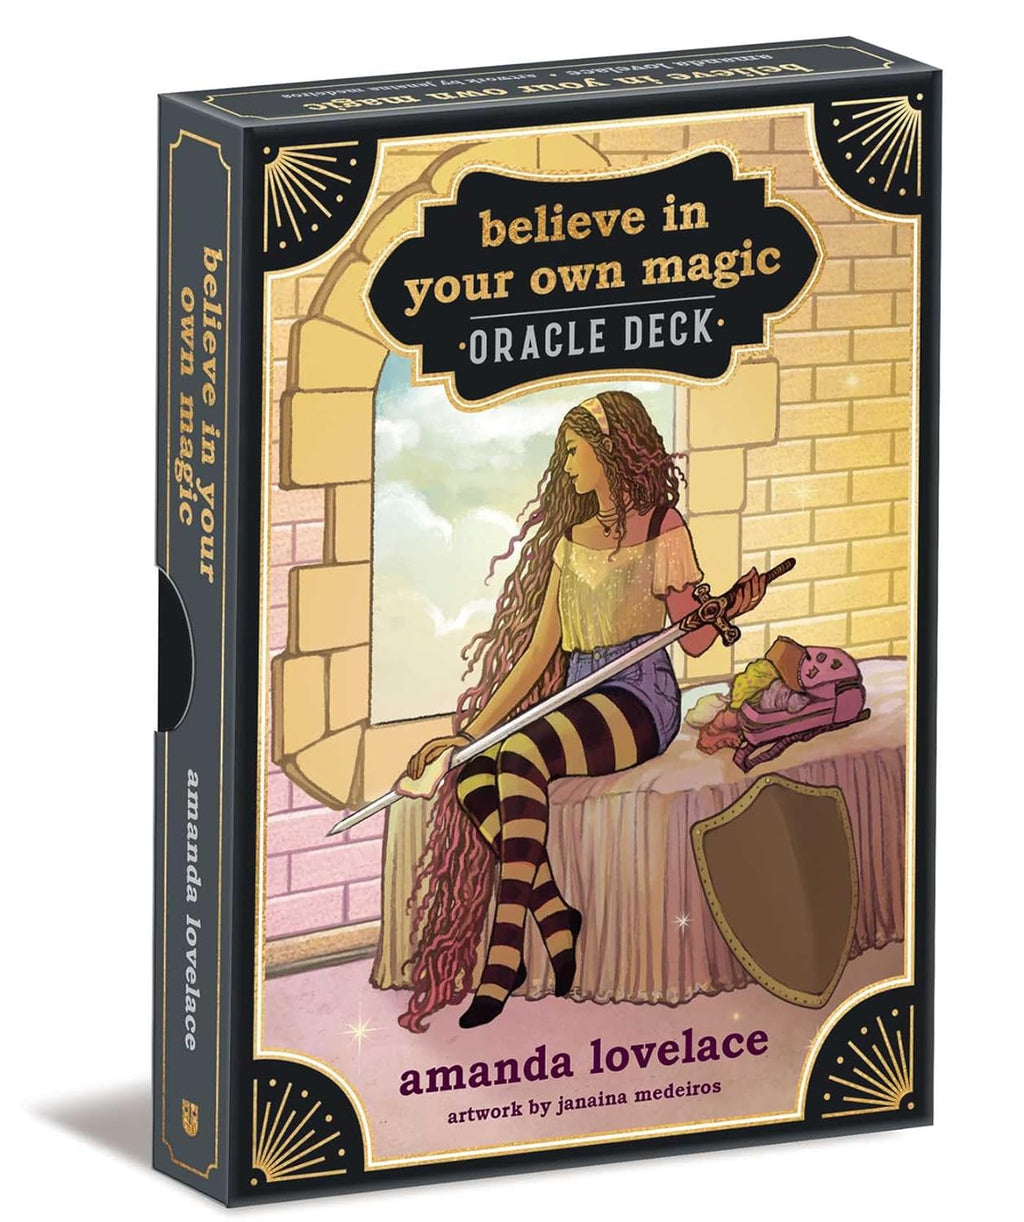 Believe in Your Own Magic Oracle Deck by Amanda Lovelace & Janaina Medeiros